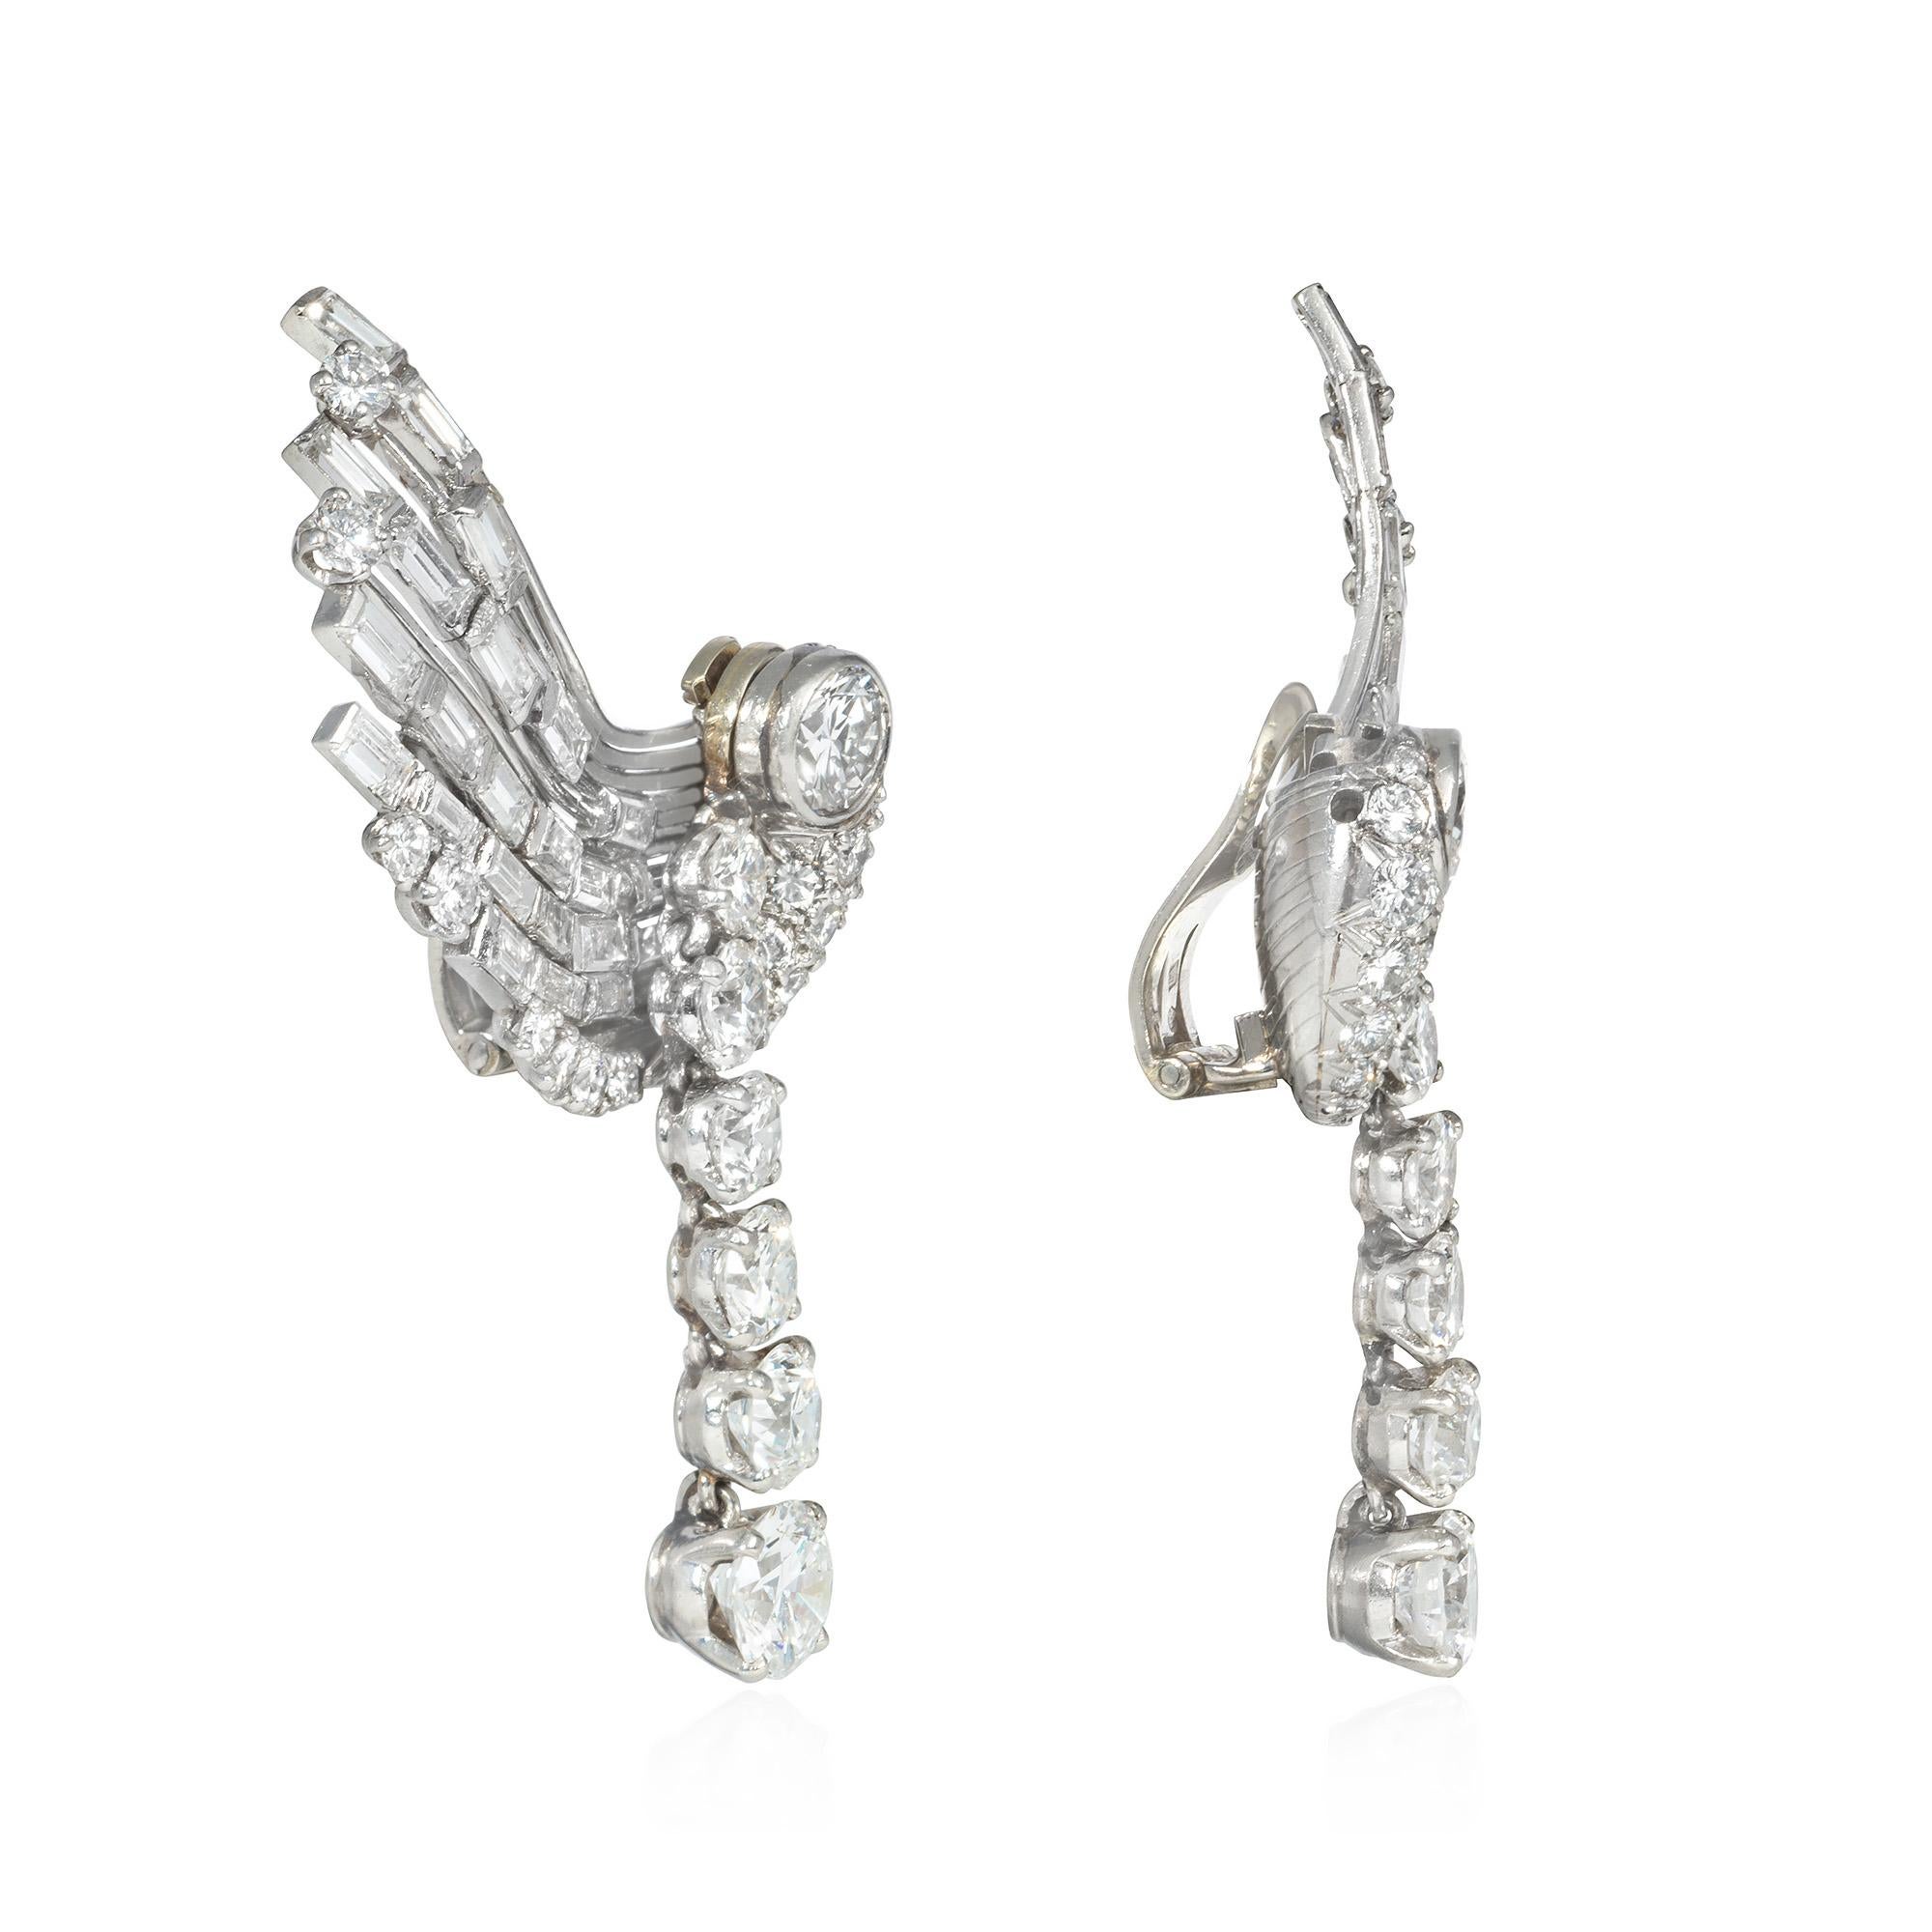 A pair of Retro diamond clip earrings designed as stylized wings, each with a removable pendant of tapering diamonds, in platinum and 18k white gold. French import.  Atw 7.50 cts.  Pendants in different gemstones may be fabricated to allow for a